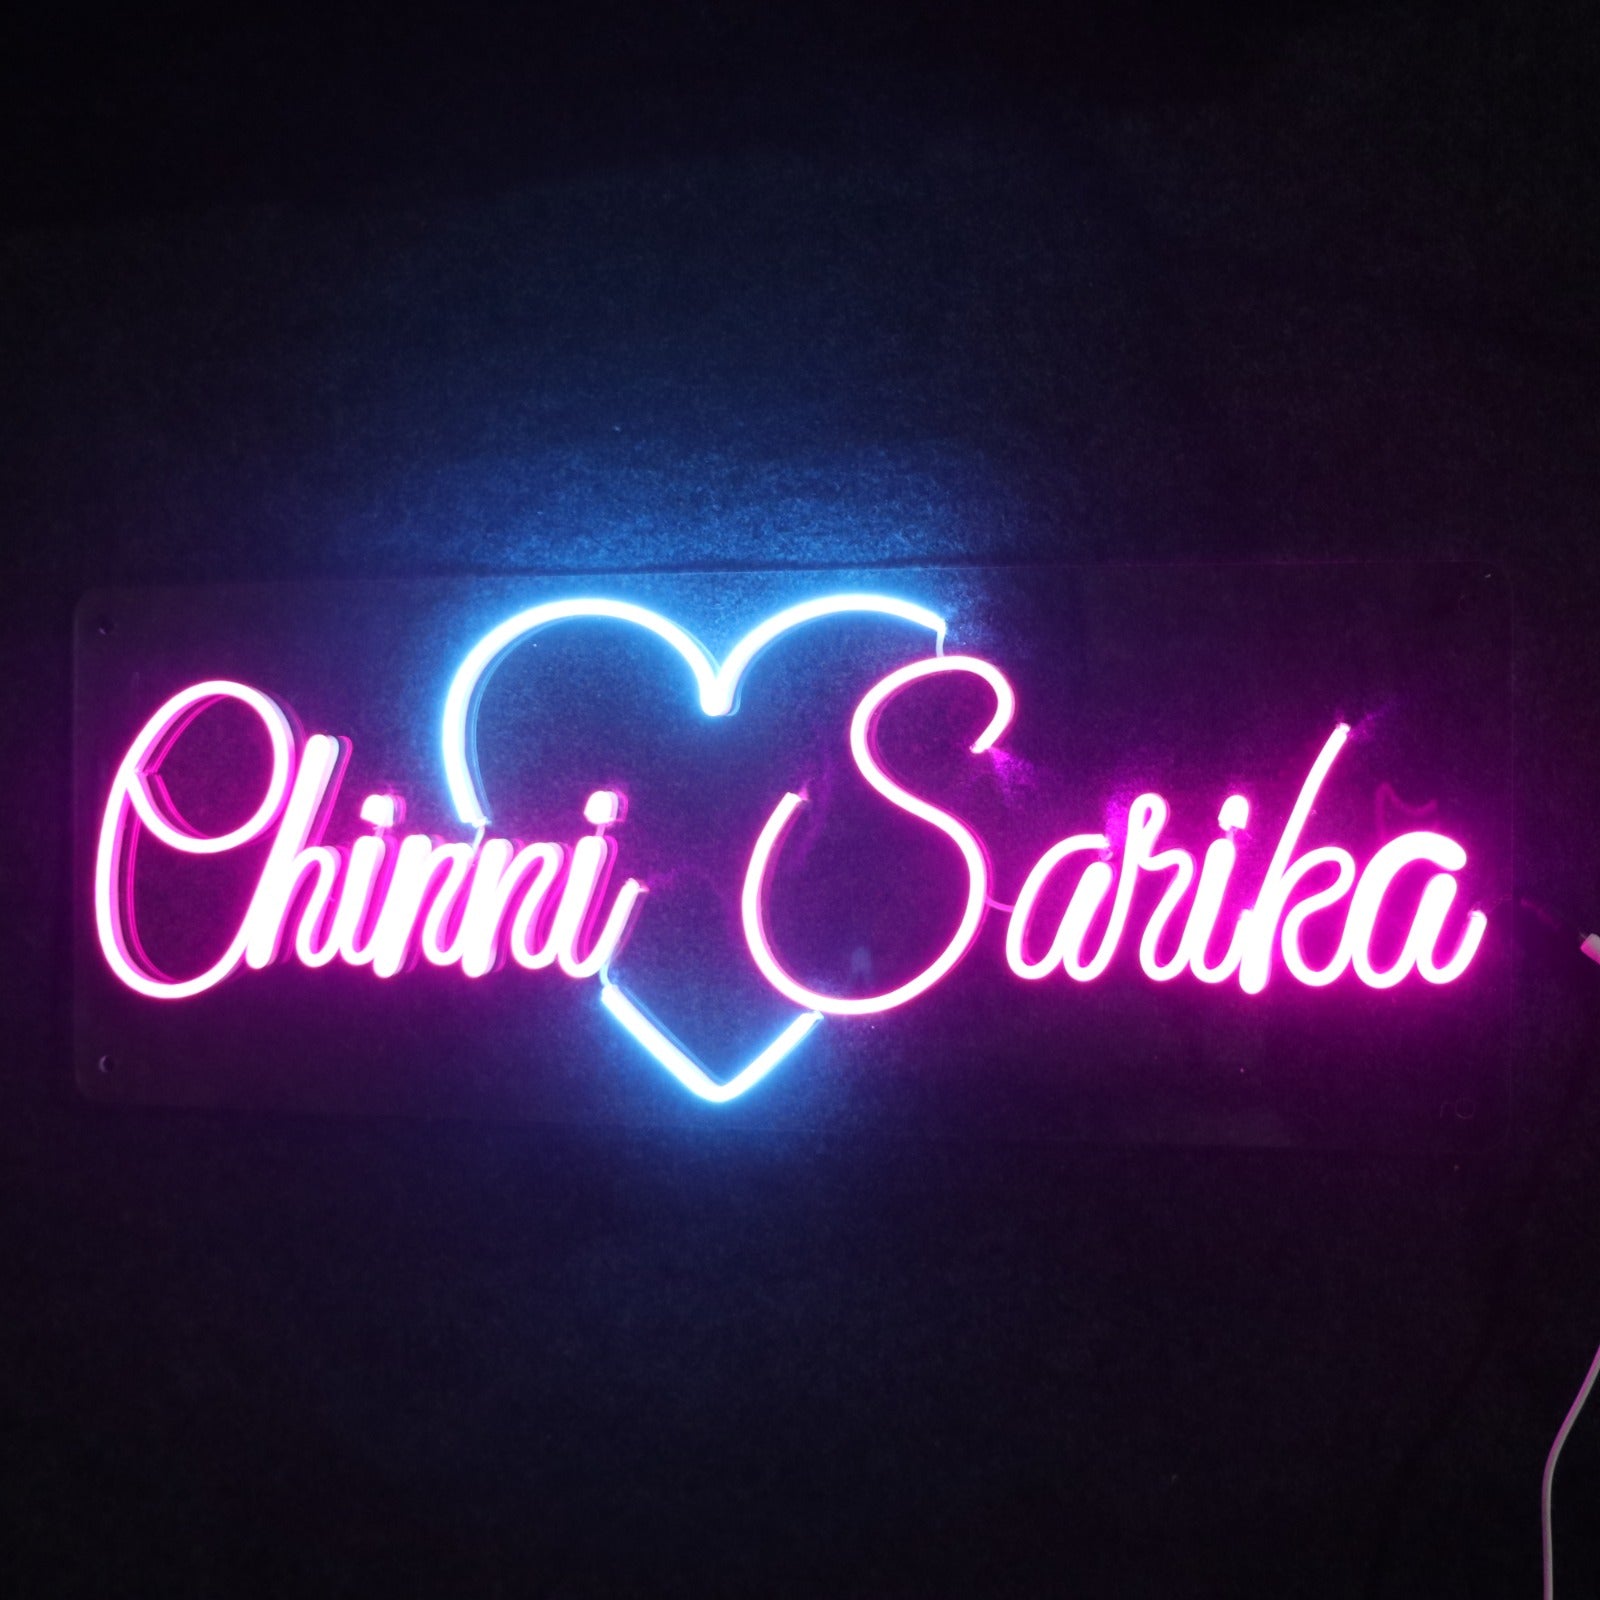 Couple Name Neon Sign - Personalized led Neon - Custom Neon Light - Neon Sign Board